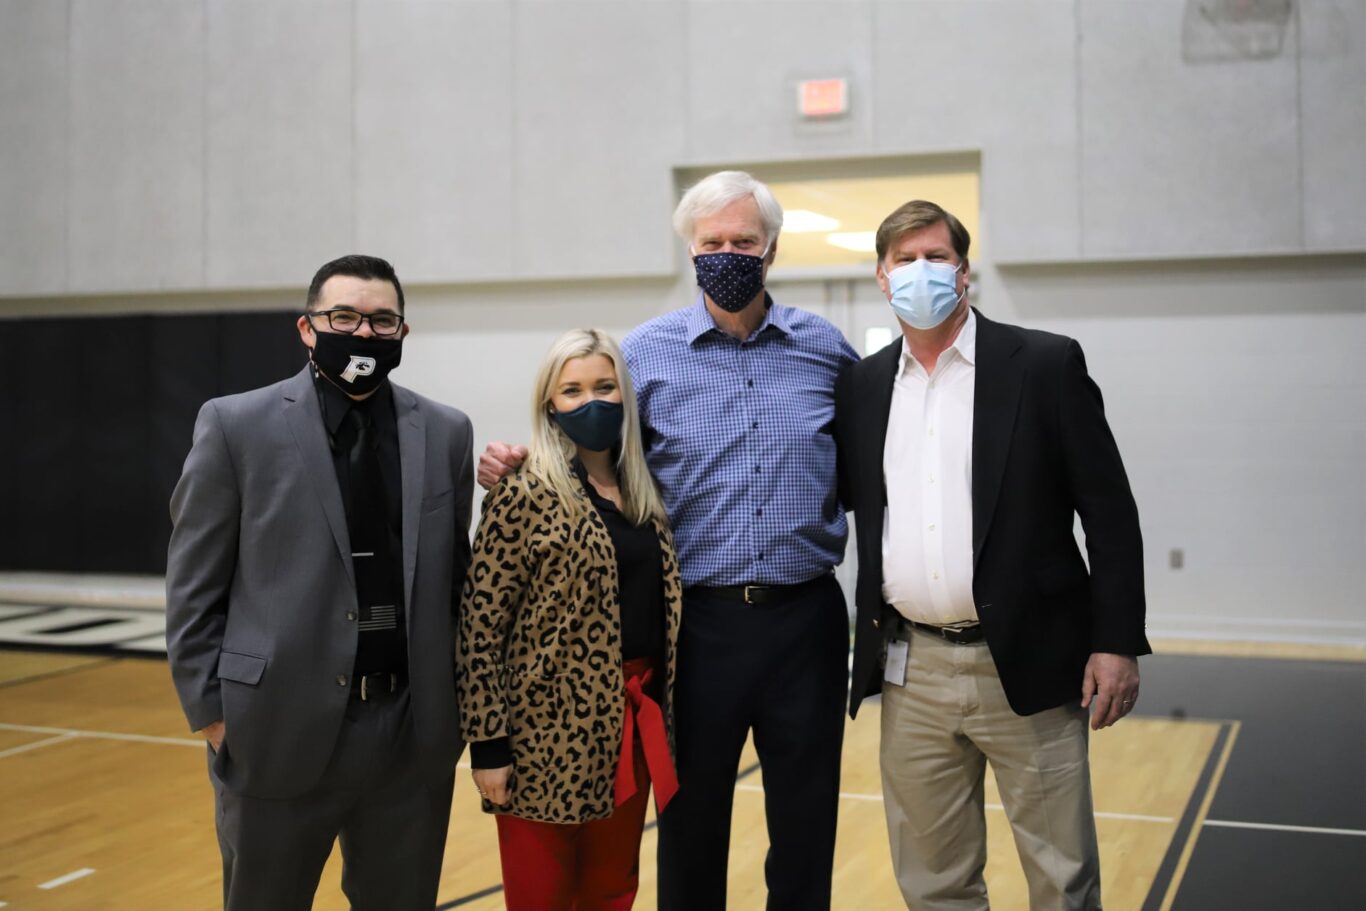 Three people wearing face masks standing next to each other in a gym, practicing COVID-19 safety measures.